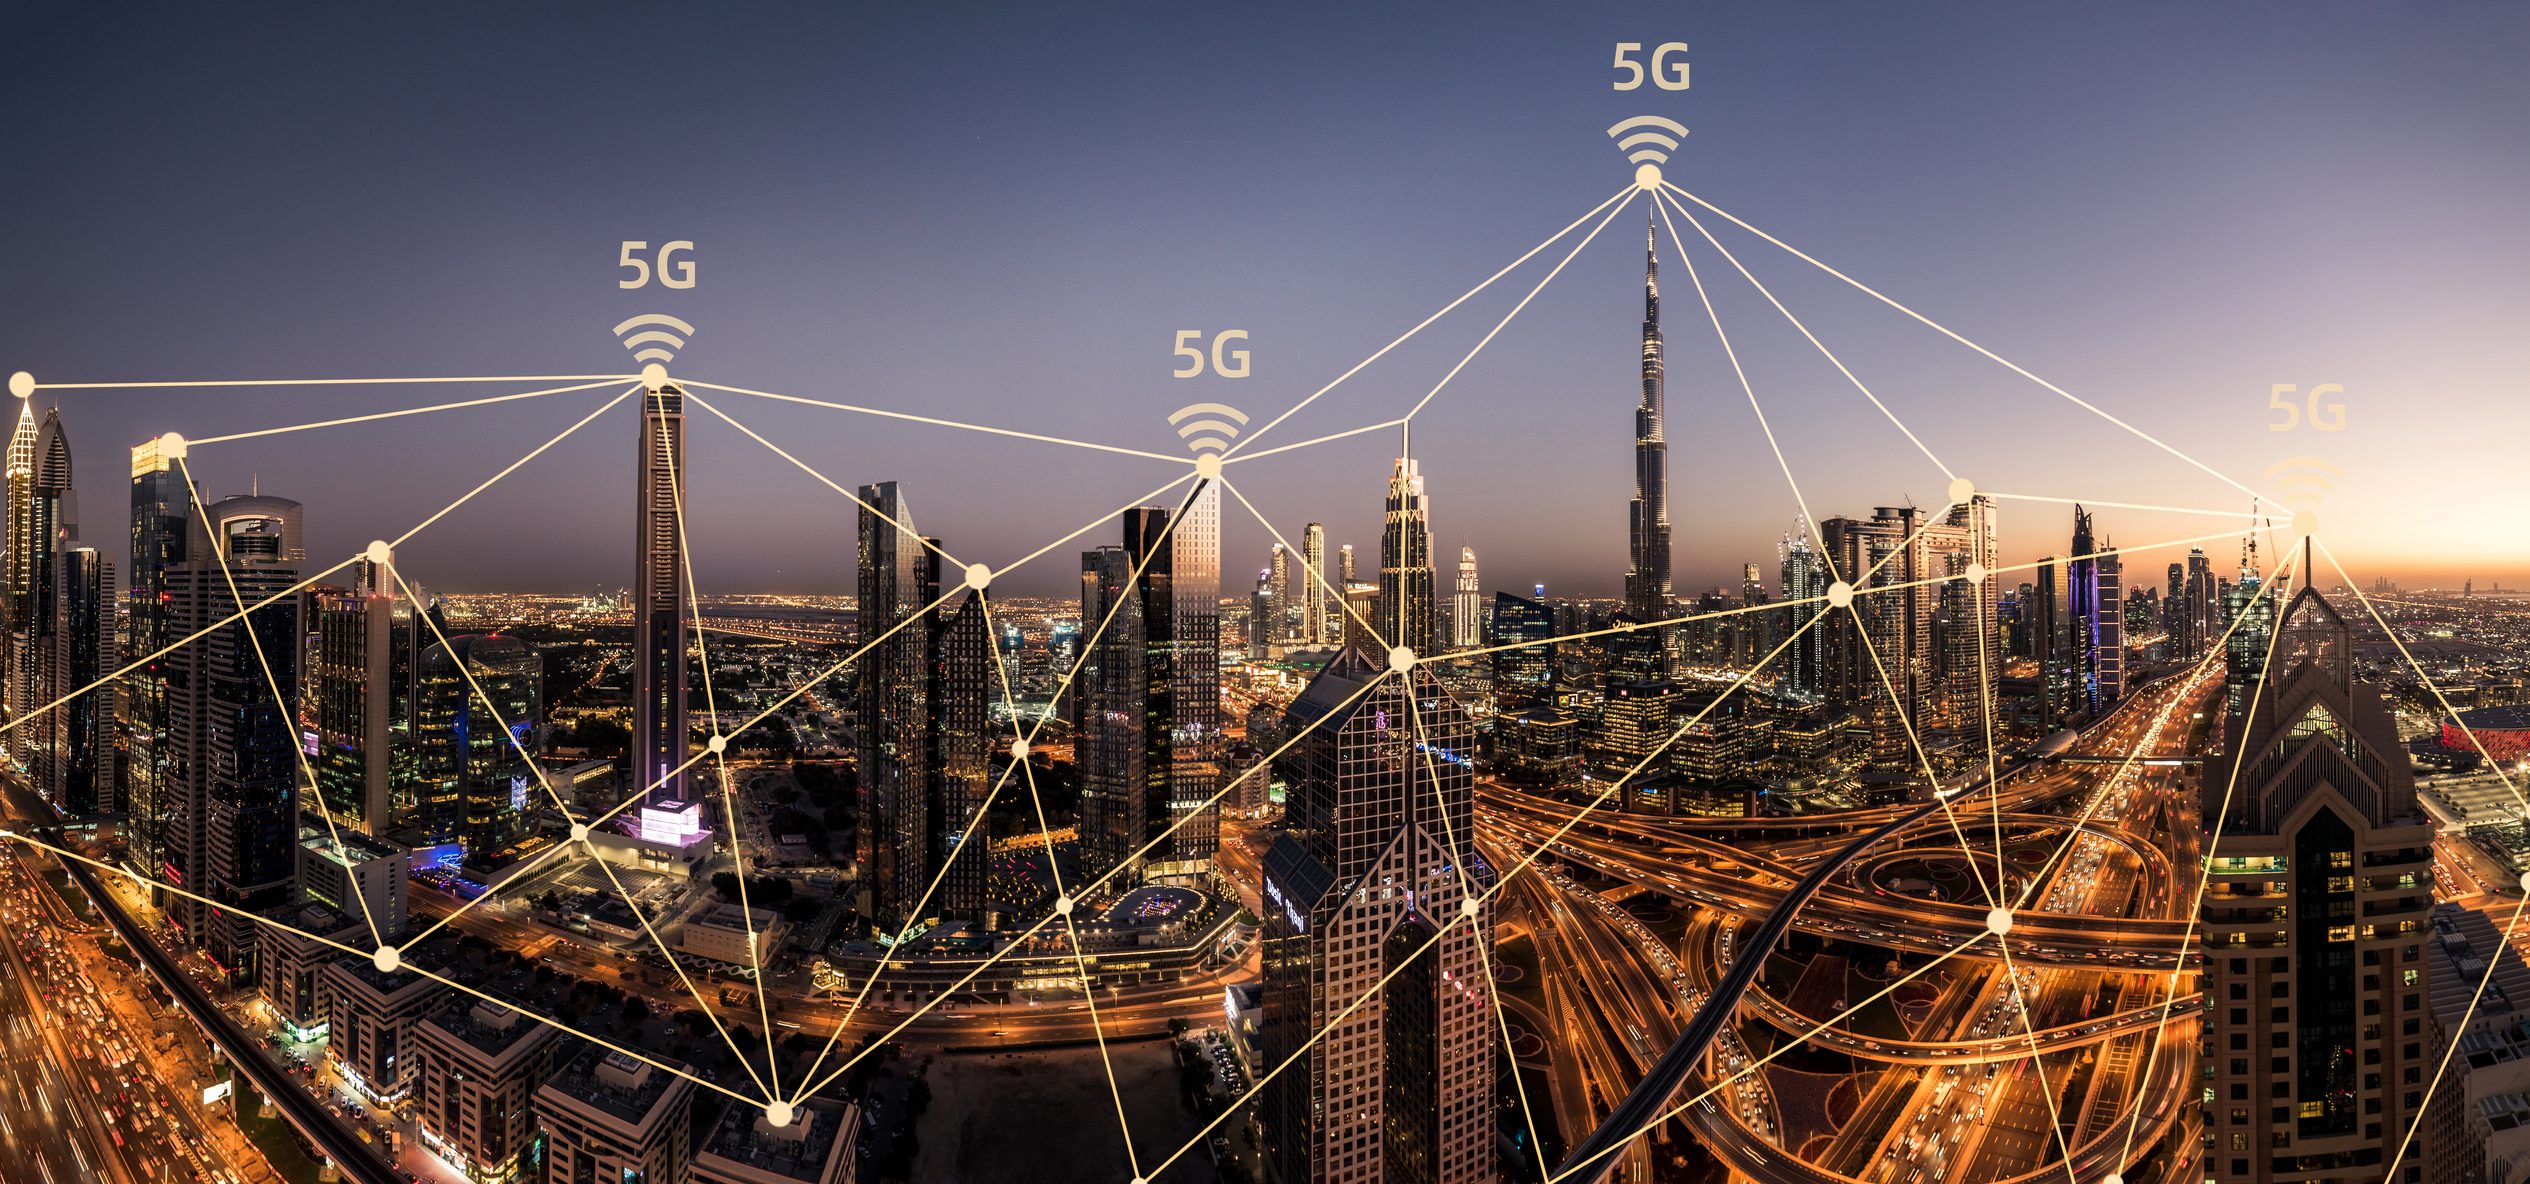 UAE's first 5G launch